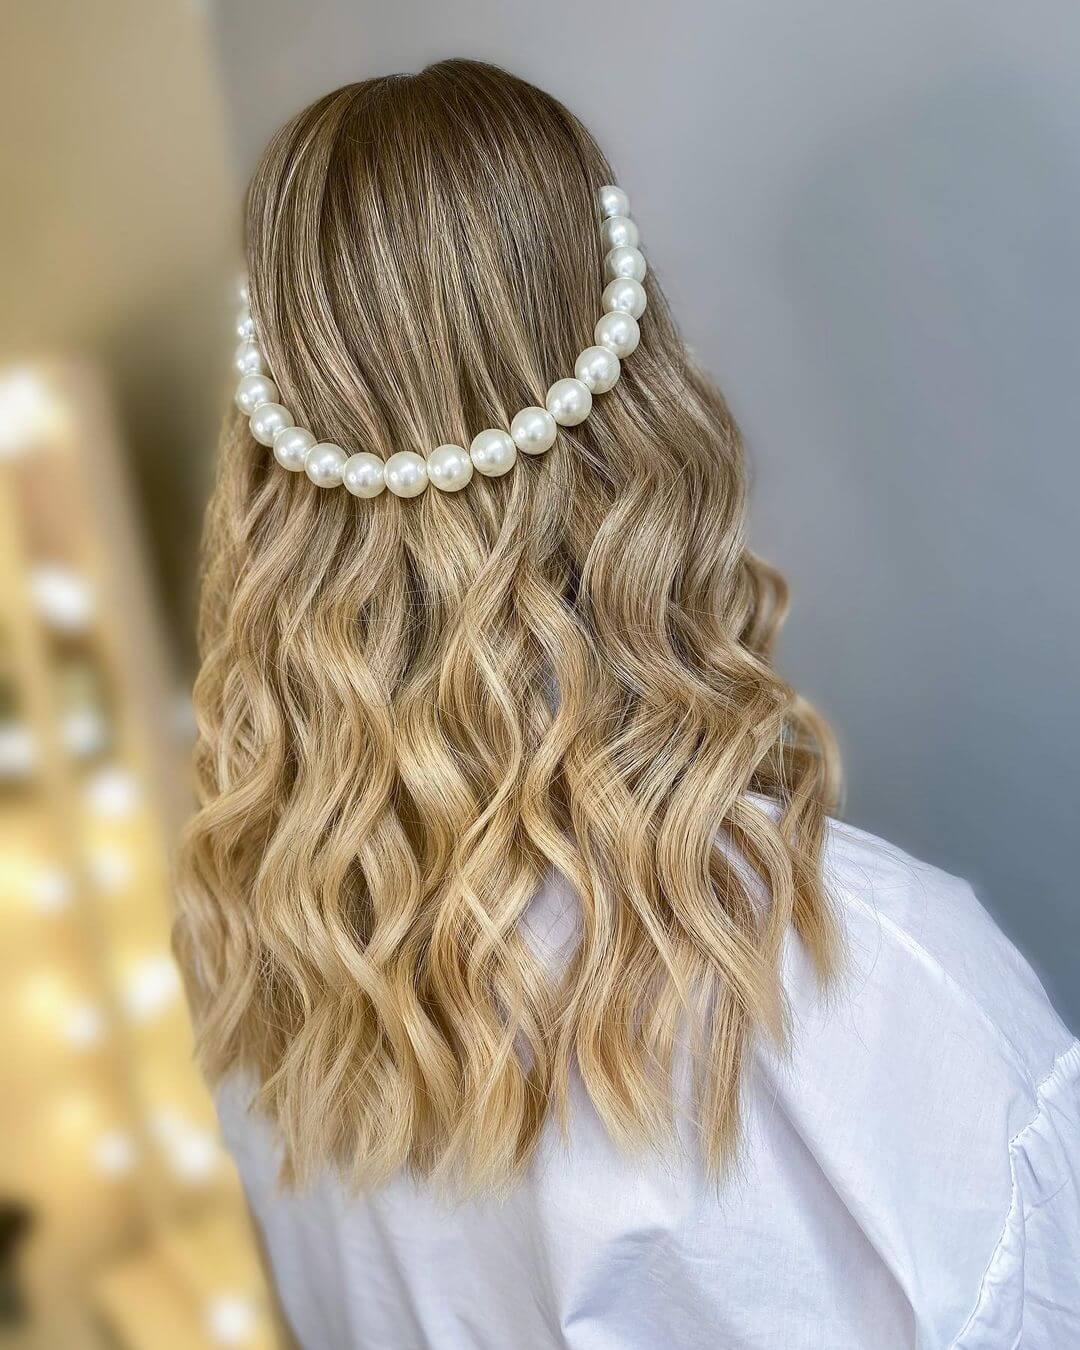 Bridesmaid Hairstyle for Young Women Waves And Pearls